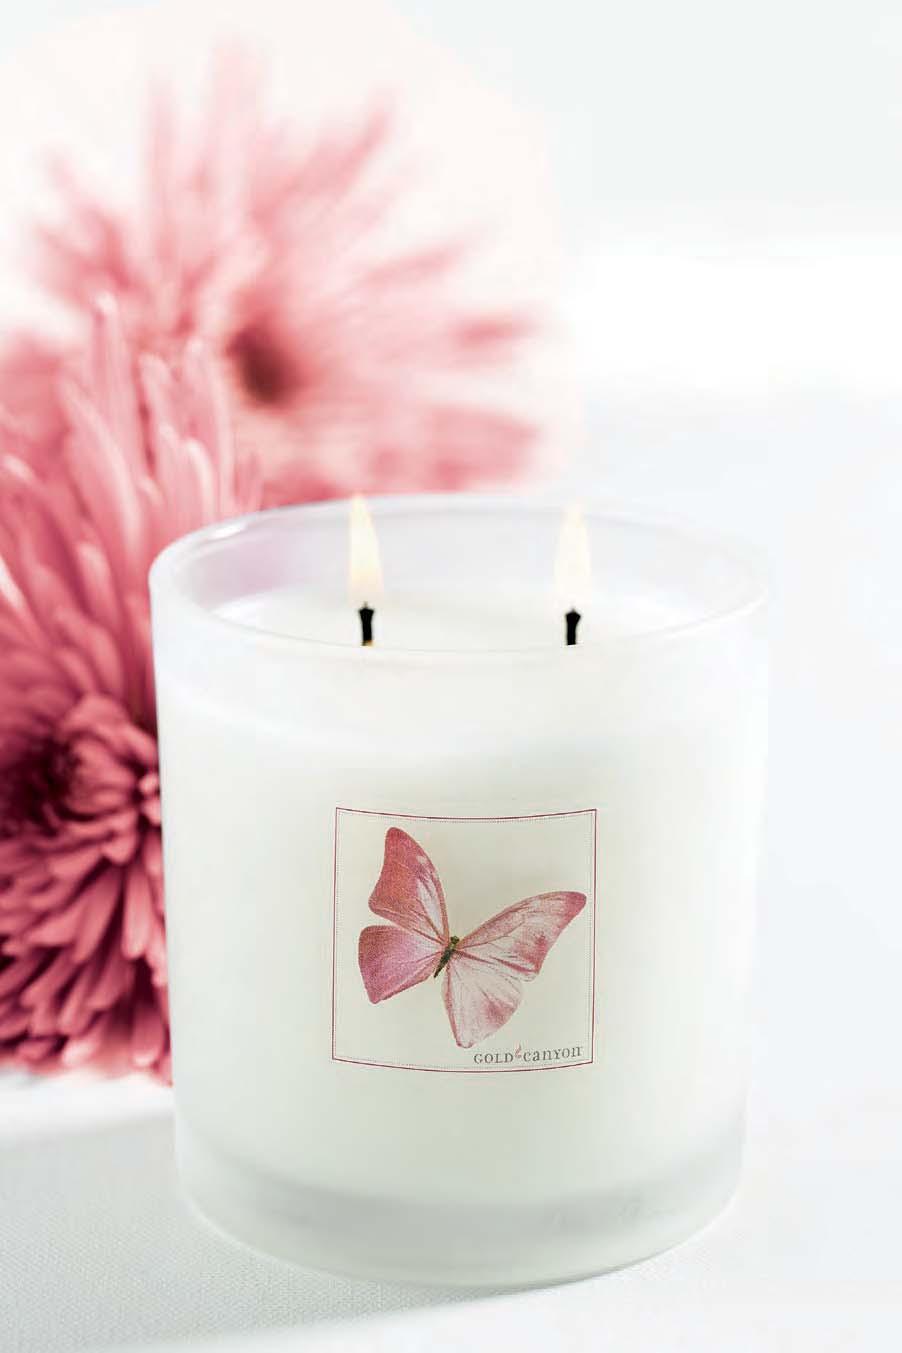 READY TO renew BURNING BRIGHT SCENTED CANDLE (7.5 OZ.) Burn time: 40-50 Hours 96680 $12.